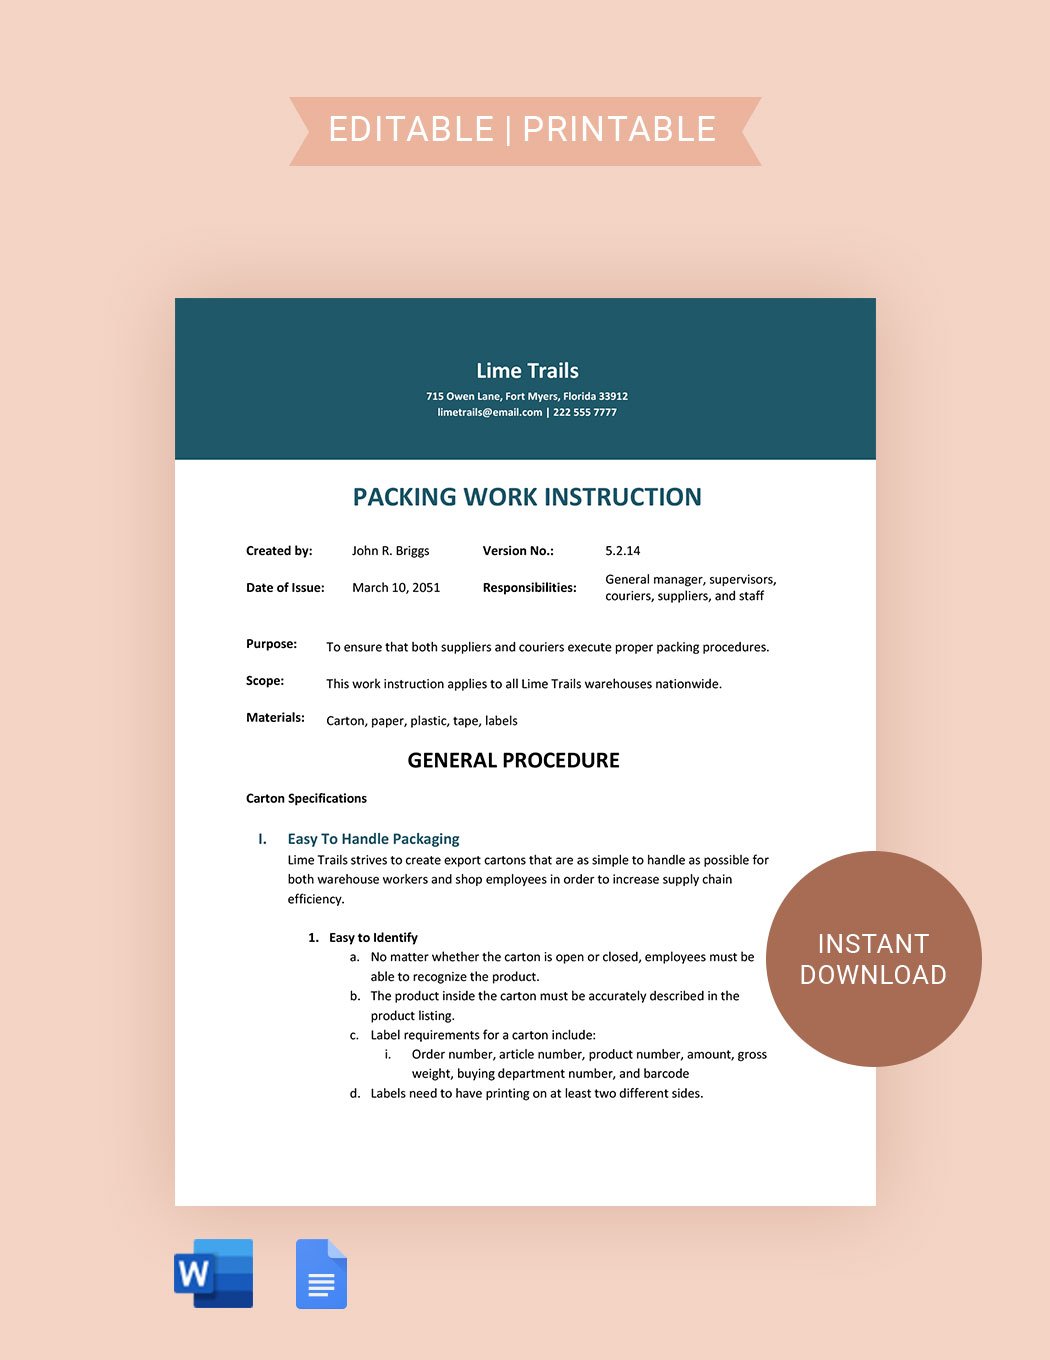 Packing Work Instruction Template in Word, Google Docs